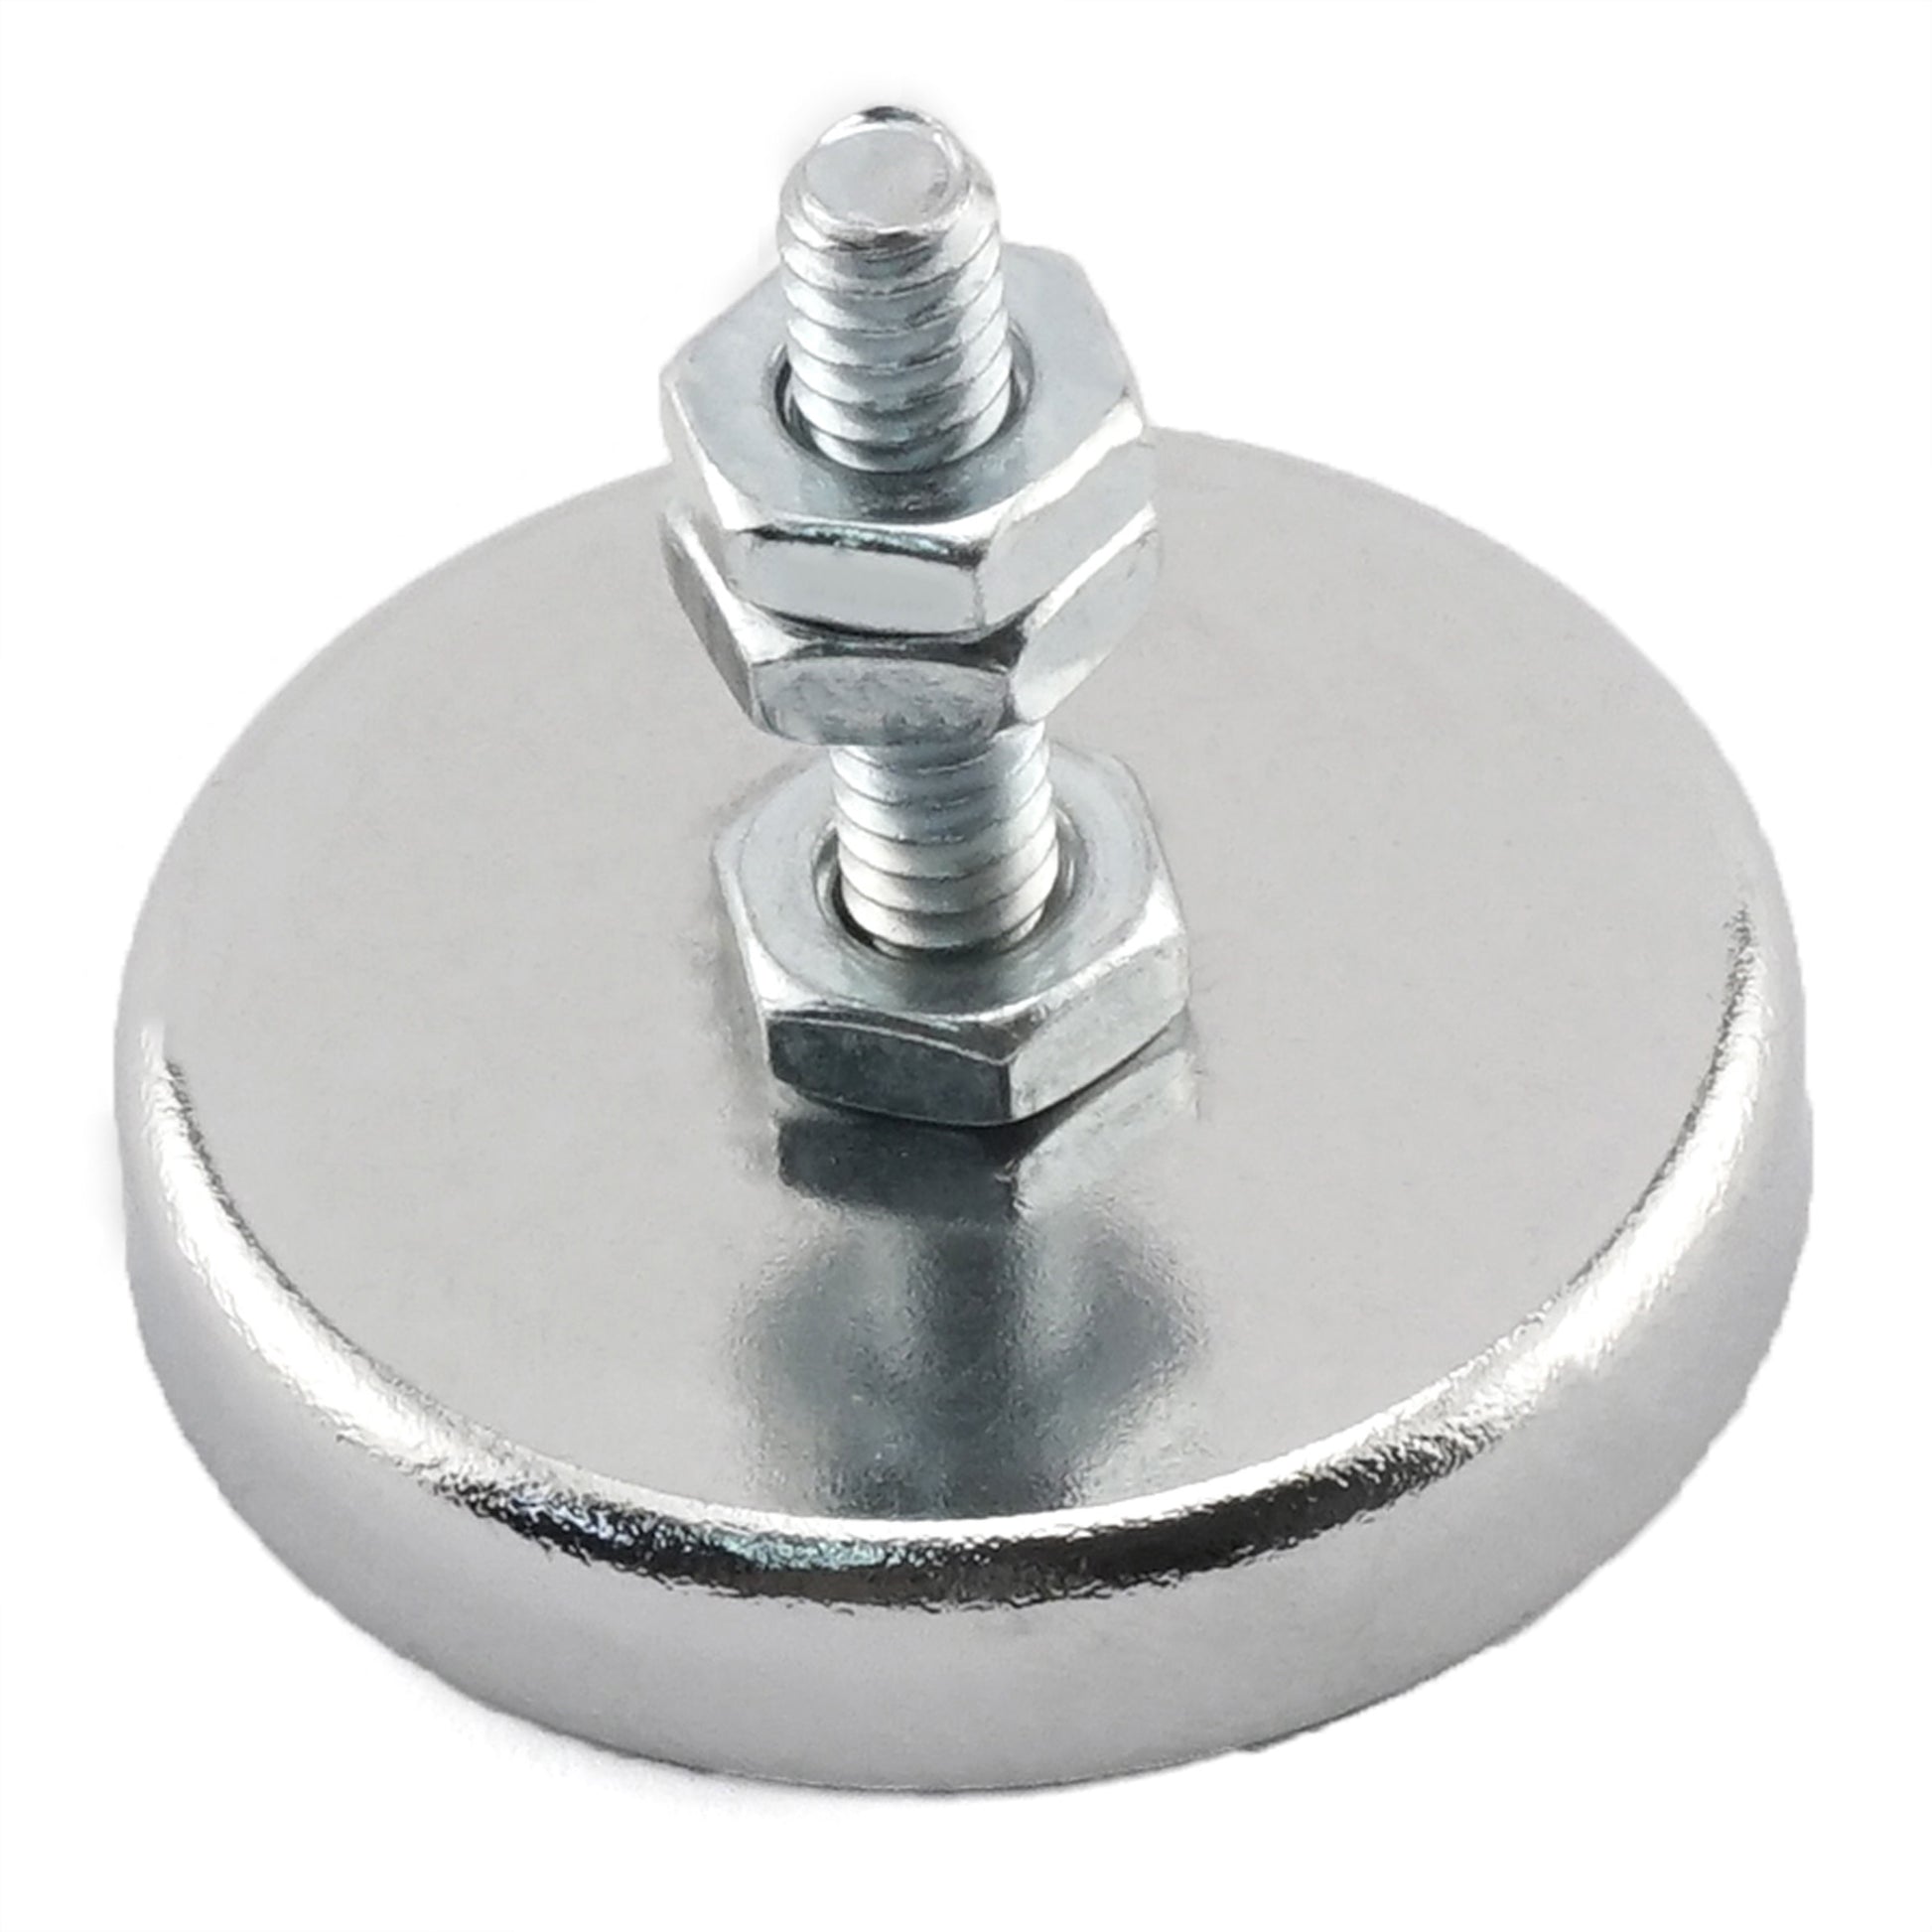 Load image into Gallery viewer, RB45B3N-NEO Neodymium Round Base Magnet with Bolt and Nuts - 45 Degree Angle View